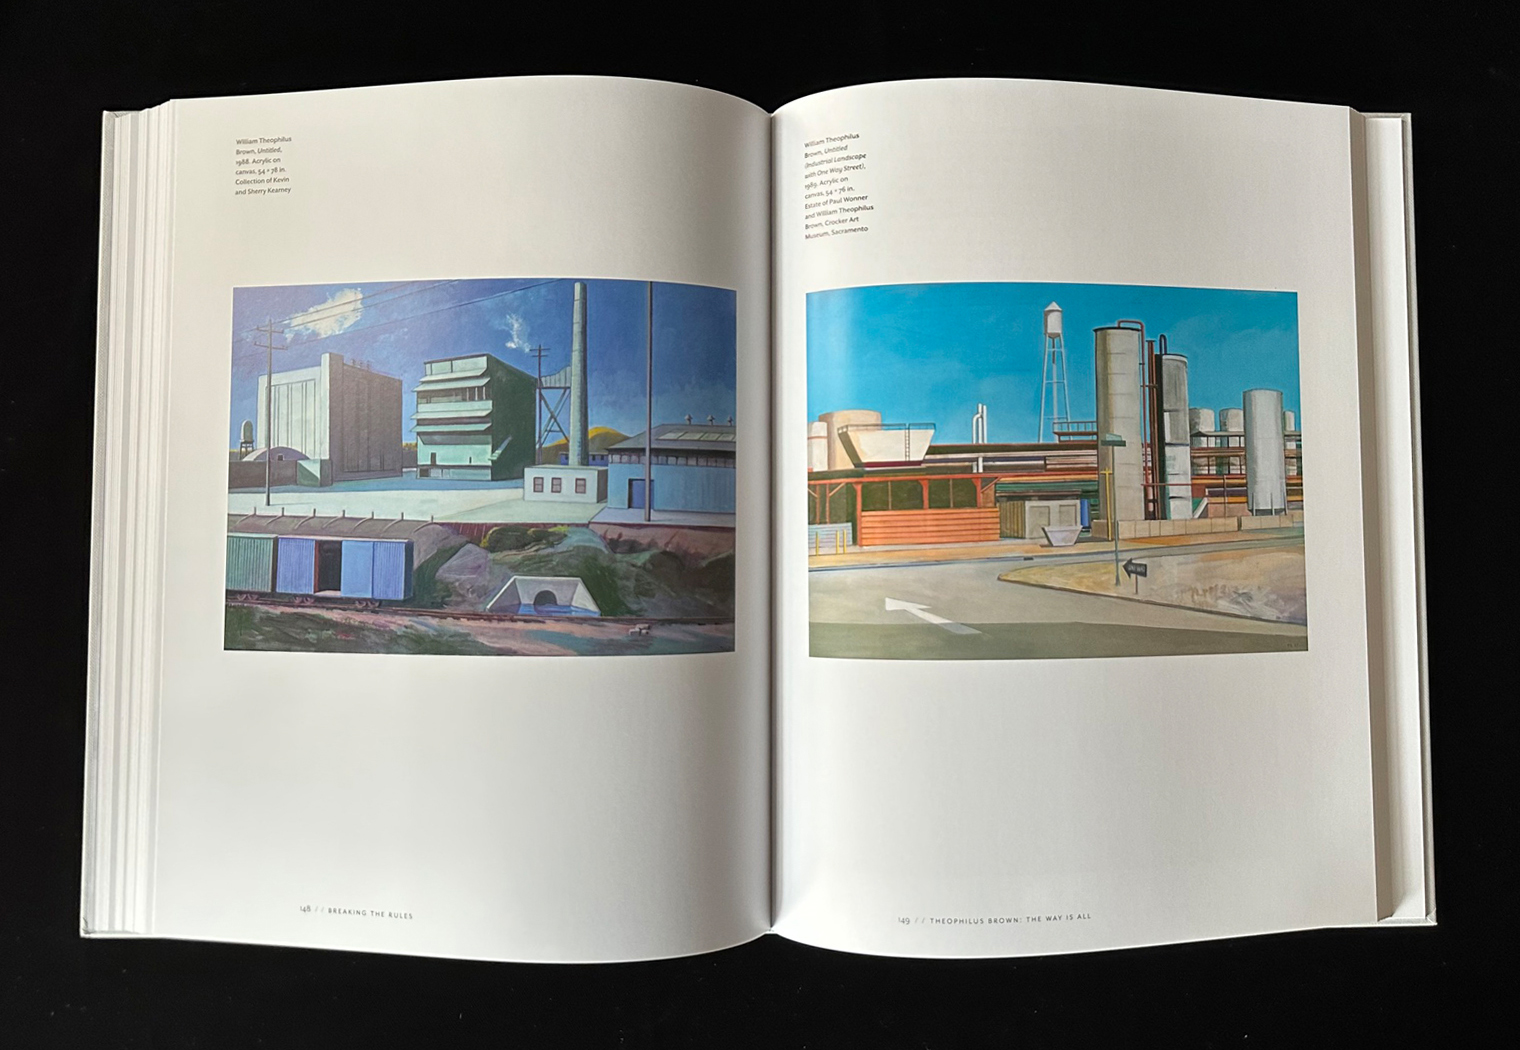 Interior spread of paintings of industrial parks by Theophilus Brown